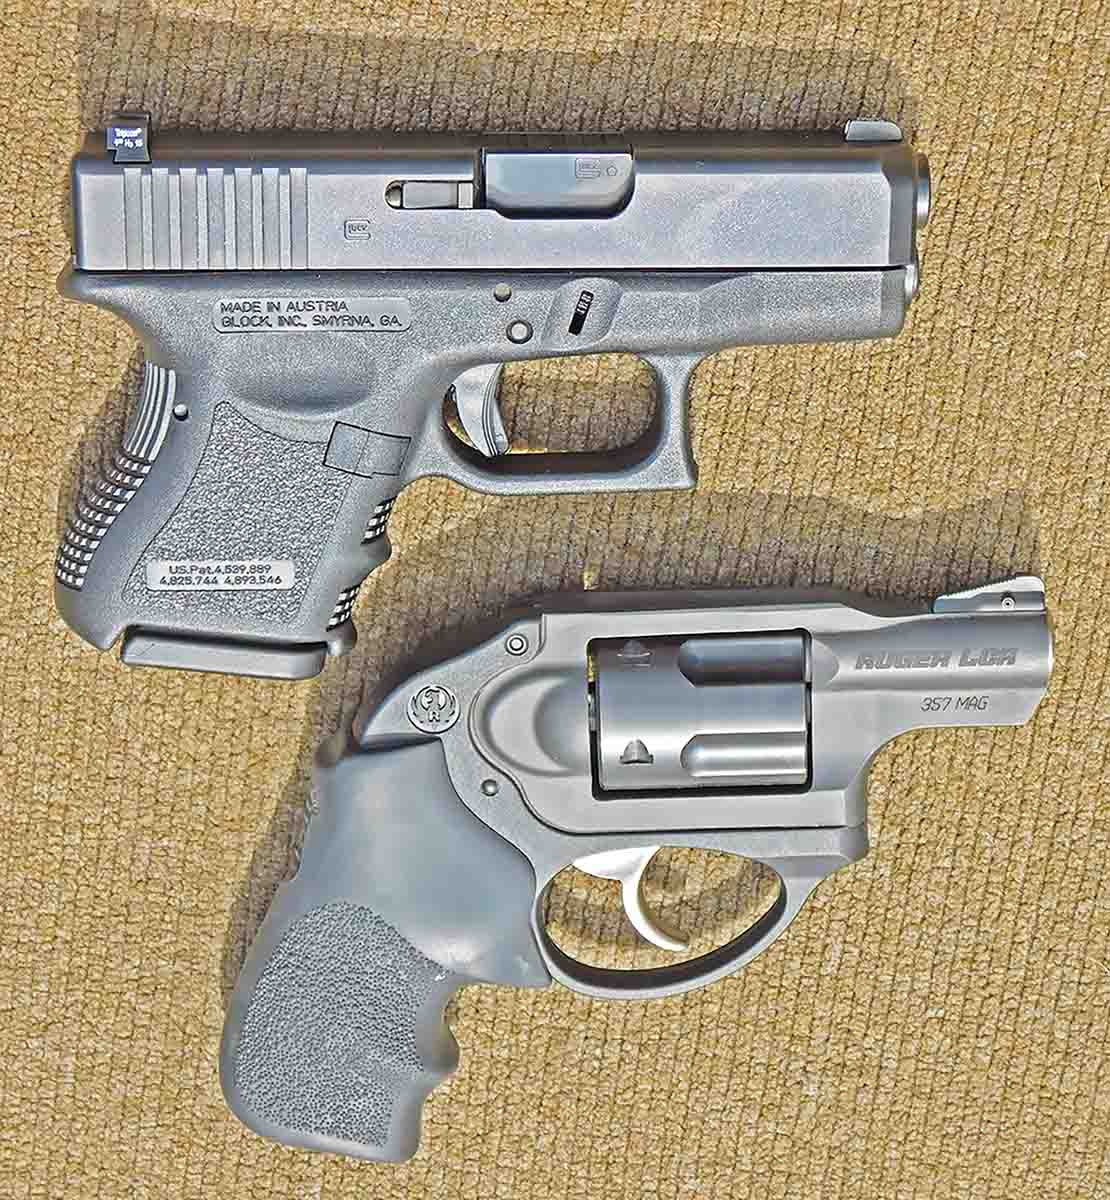 Compact as it is, the LCR is approximately the same size as the 10-shot Glock 26. In testing, 9mm Luger loads from the Glock compared well against the short-barreled 357 Magnum.